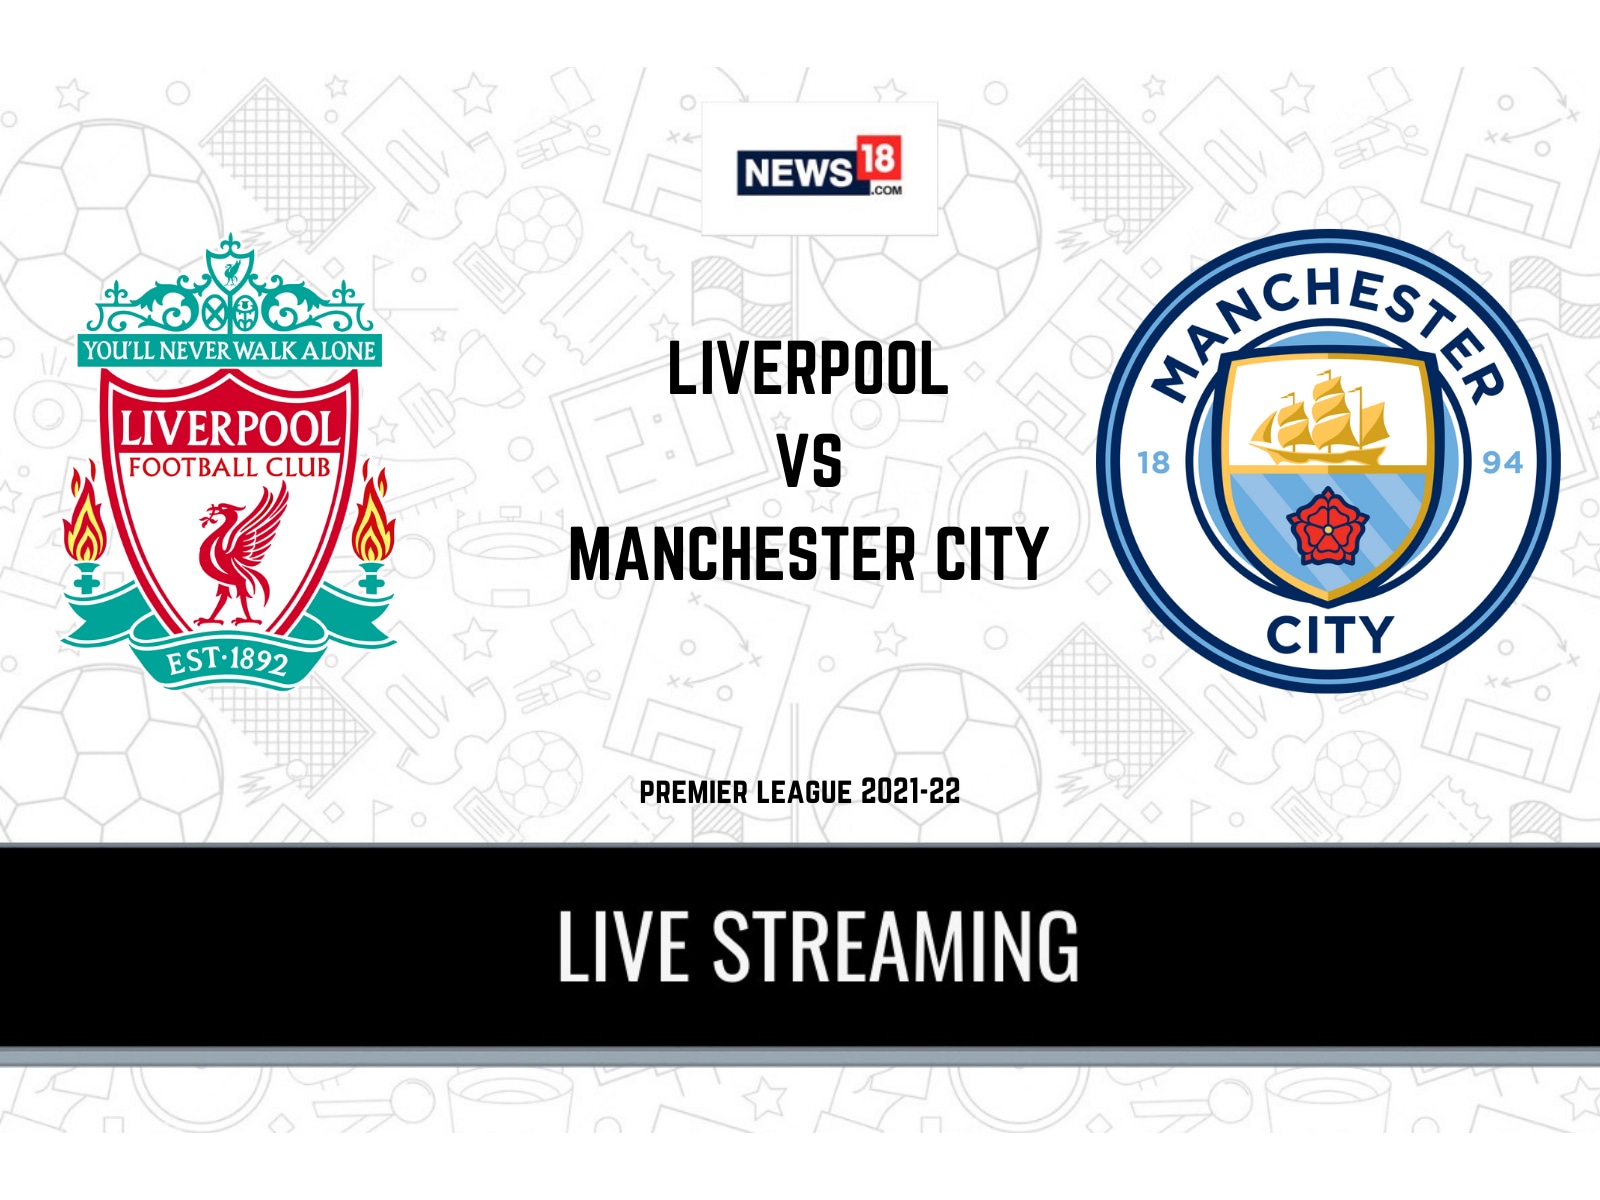 Premier League 2021-22 Liverpool vs Manchester City LIVE Streaming When and Where to Watch Online, TV Telecast, Team News